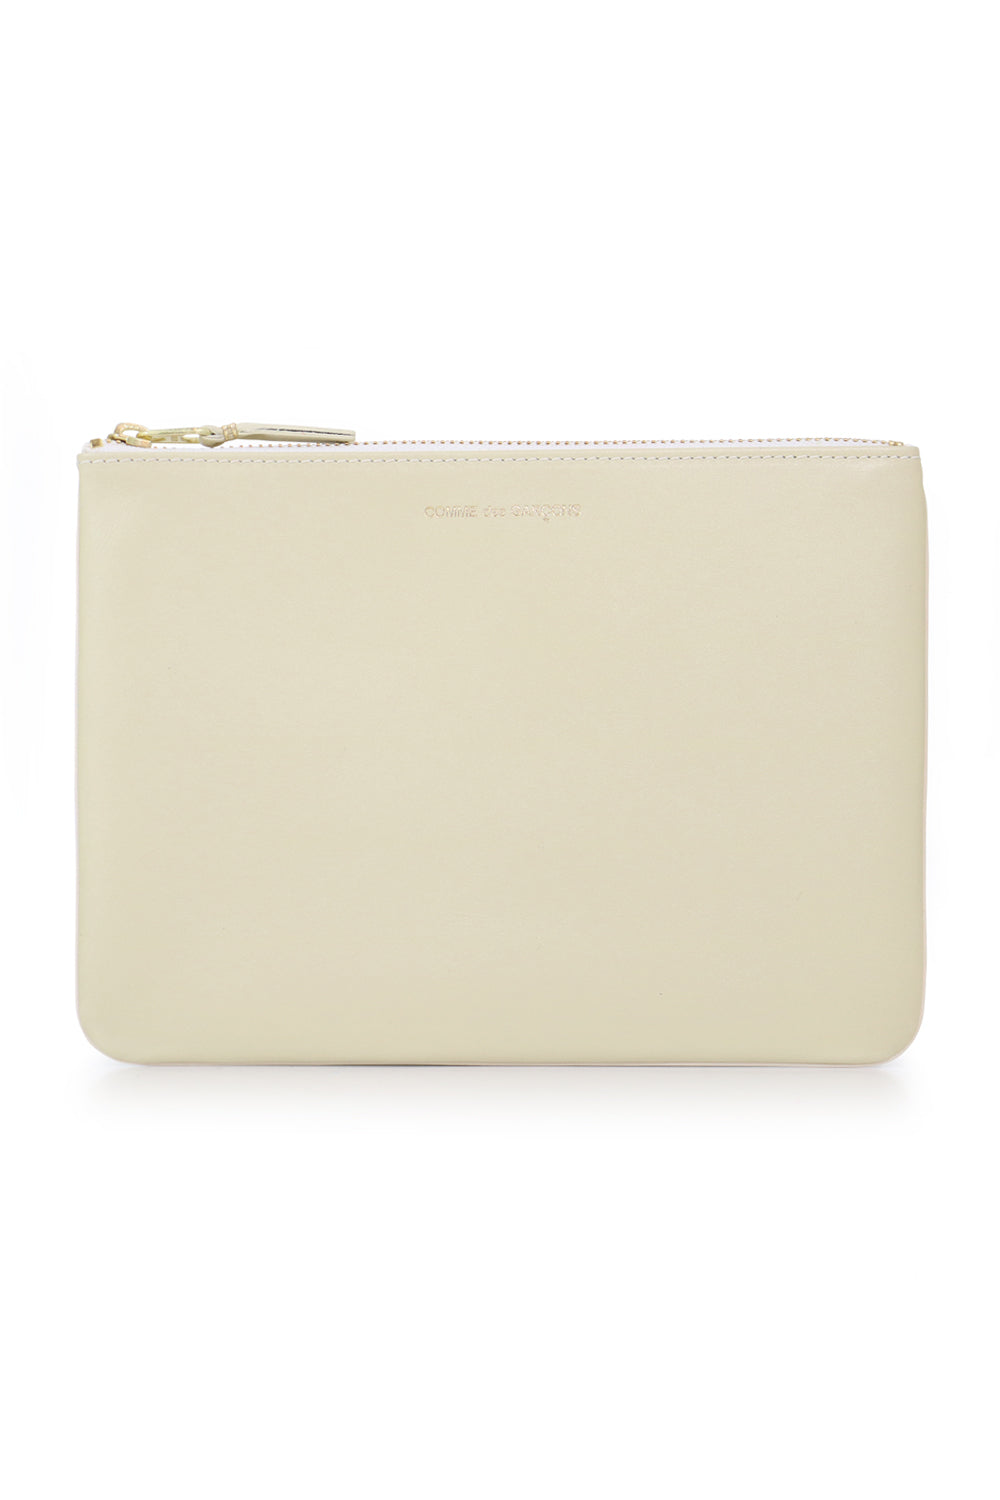 COMME DES GARCONS RTW WHITE CLASSIC LEATHER POUCH  | OFF WHITE